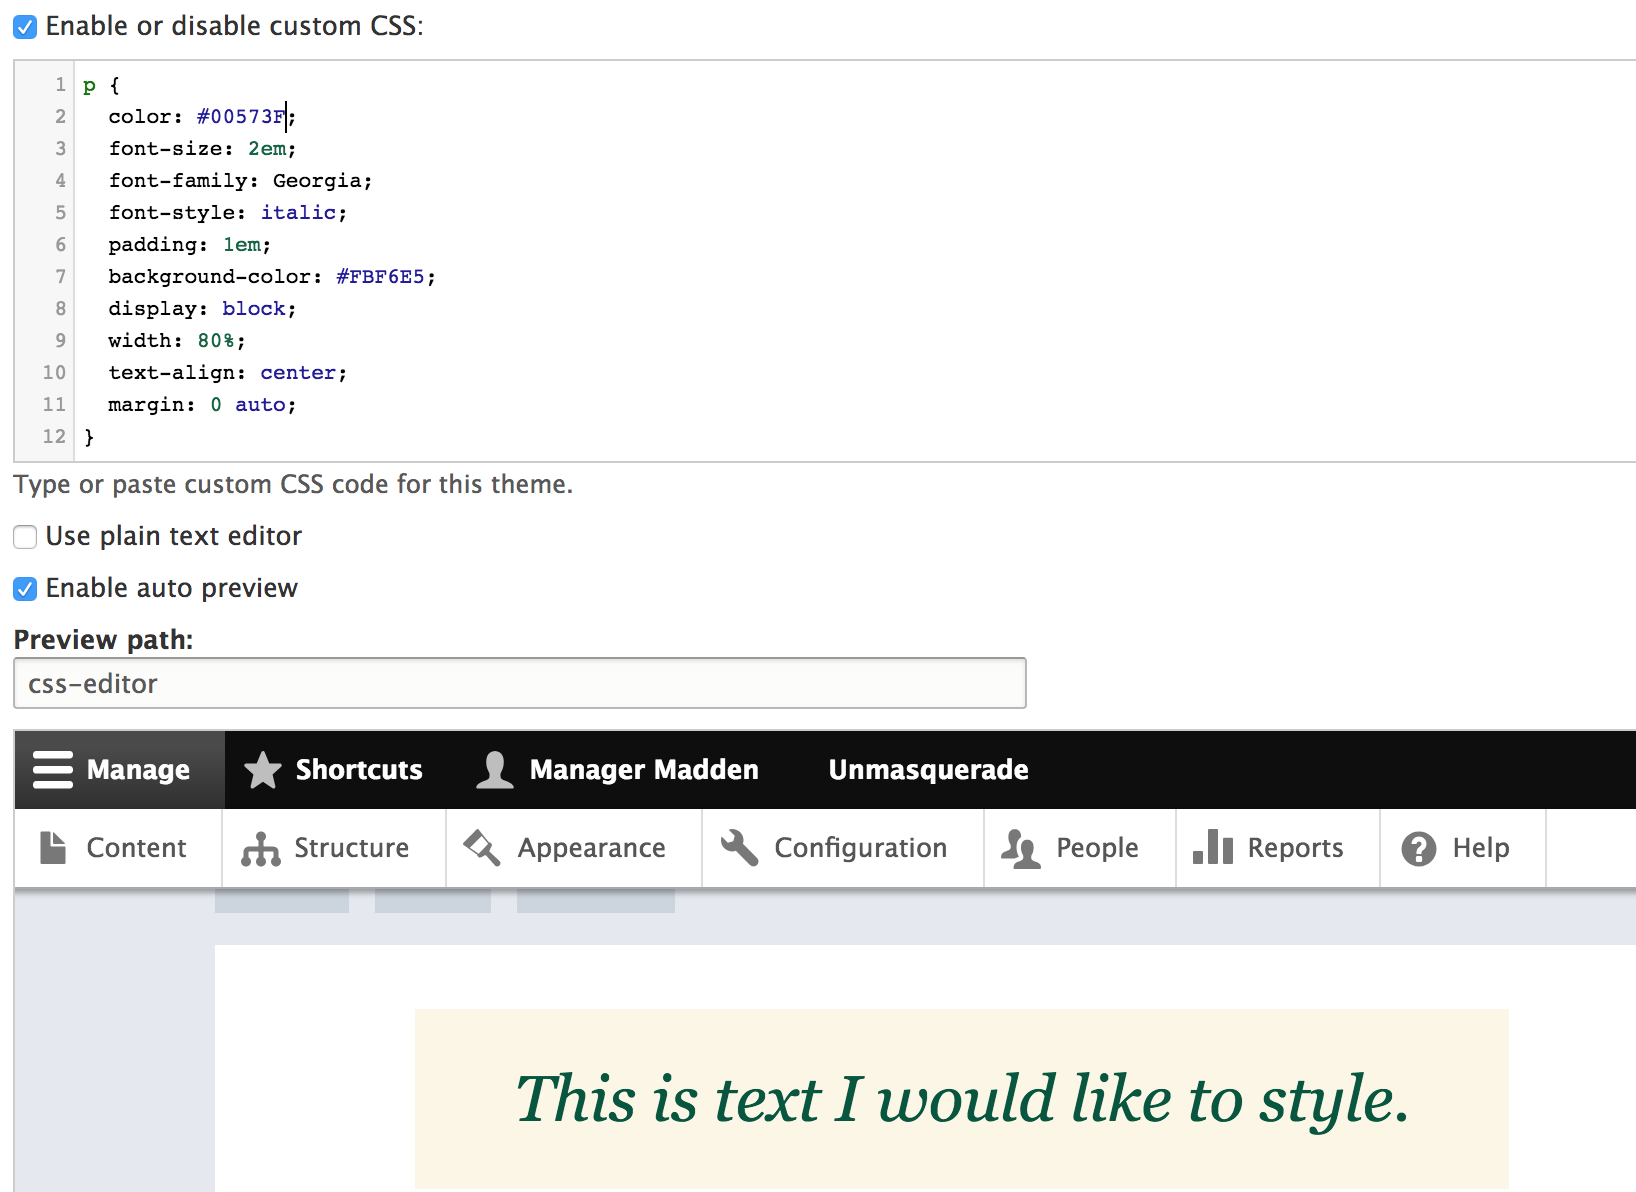 Example of css styles being applied to a page